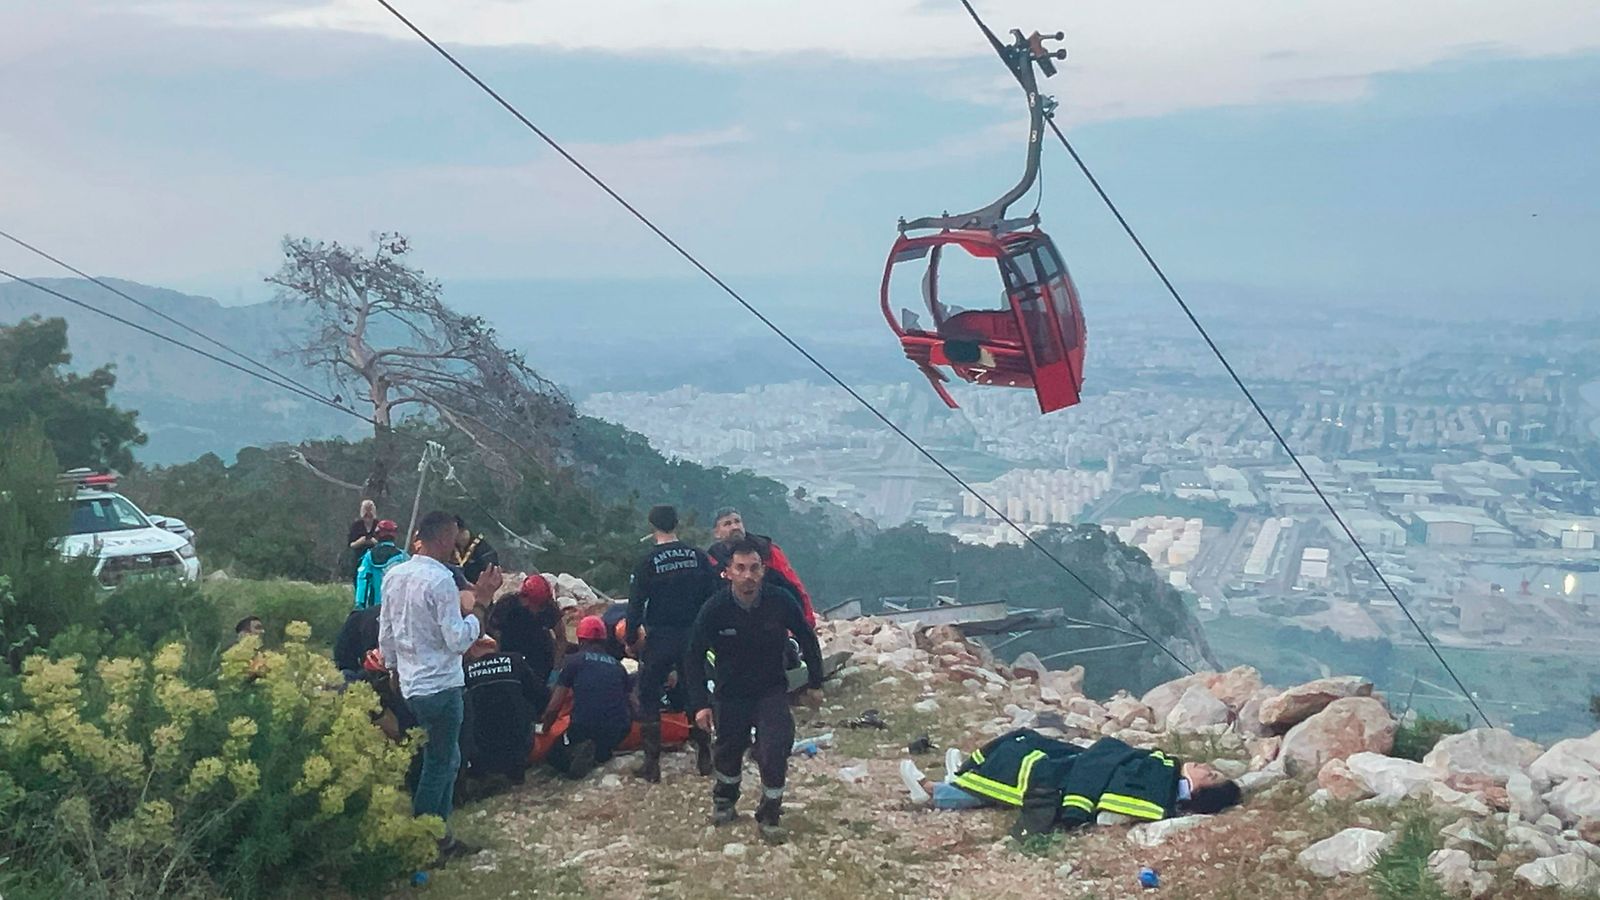 Turkey cable car collision: All 174 people stranded in cable cars above mountain rescued a day after fatal crash